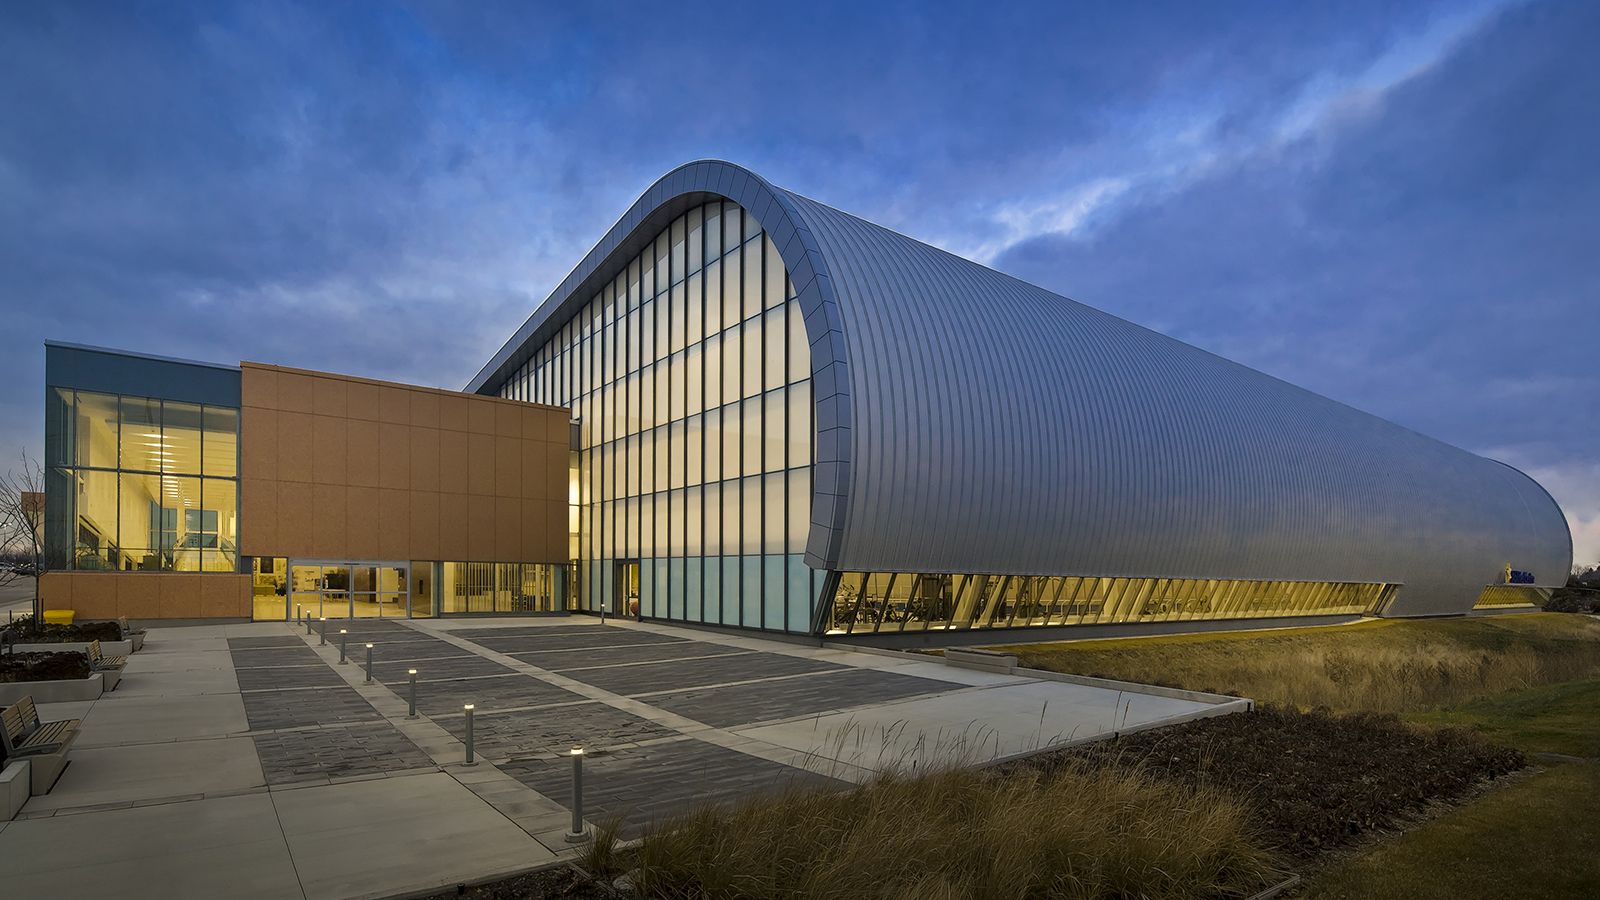 Large, curved, metal-clad structure with curtain wall windows adjoining a rectangular metal and glass building.